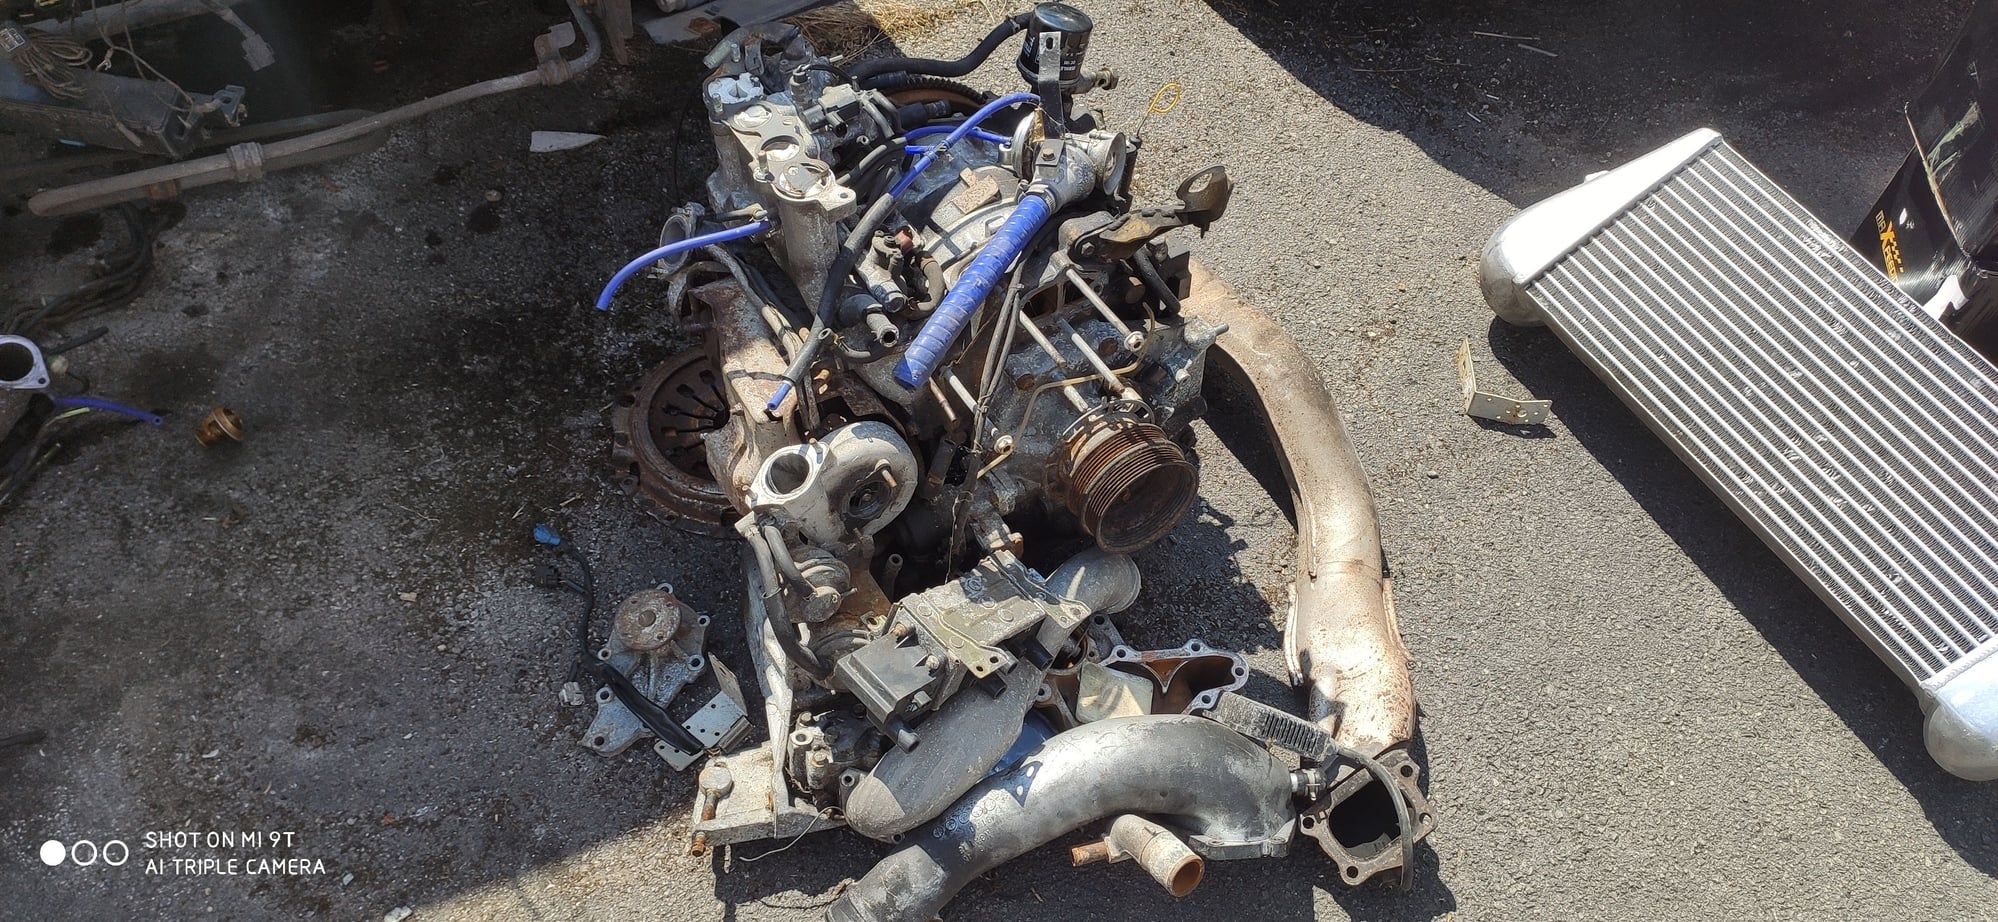 Engine - Complete - Full Complete RX7 FD 13b Engine For Sale! 3250 gbp ONLY! Located:... - Used - 1993 to 1999 Mazda RX-7 - Bedford MK43, United Kingdom